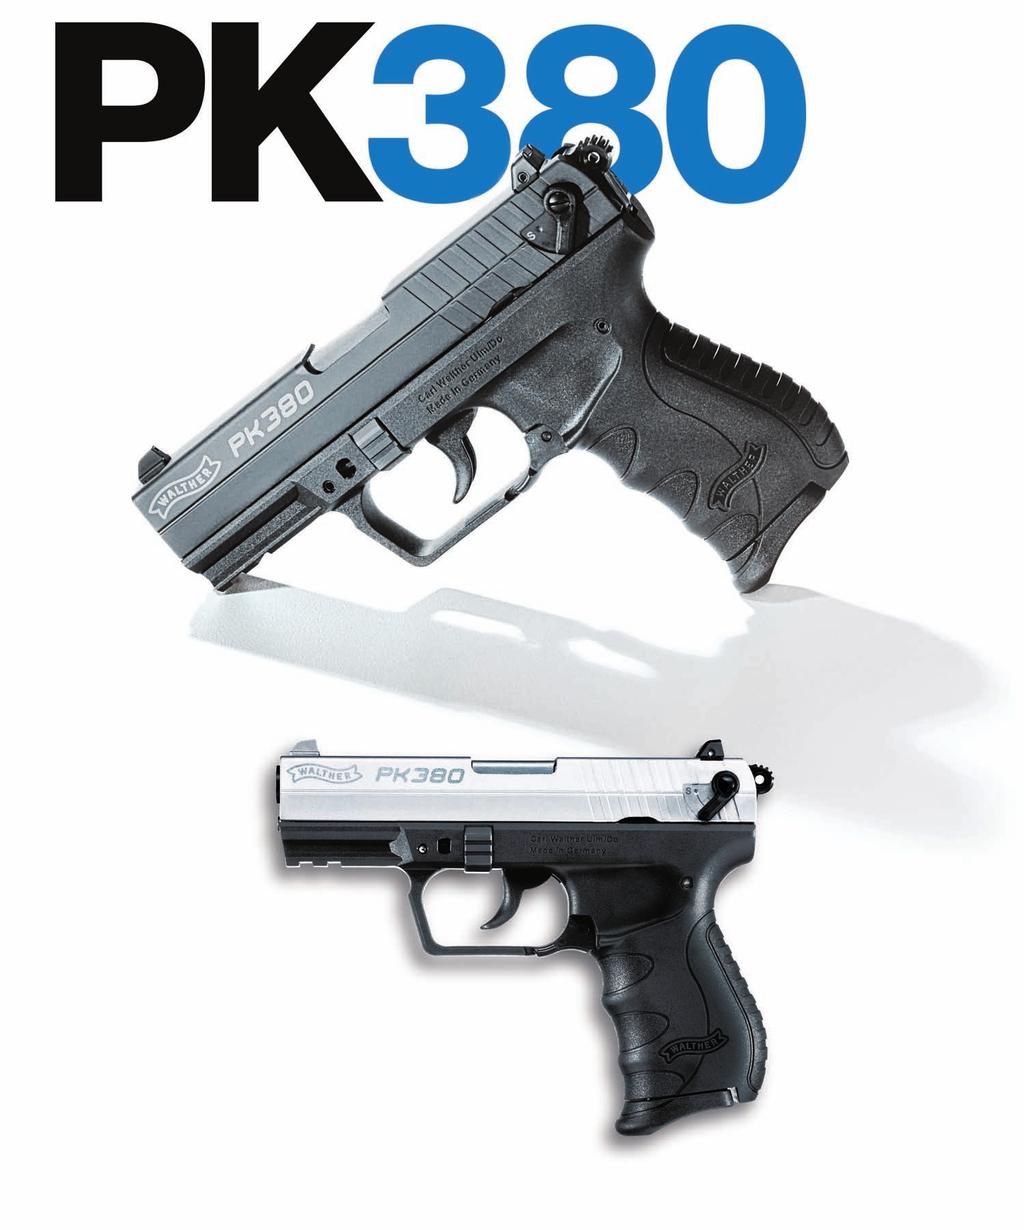 The Pistol Kompact delivers power in an ambidextrous, lightweight and comfortable pistol nearly the same size as the popular P22. [The PK380] will come to be regarded as one of the best.